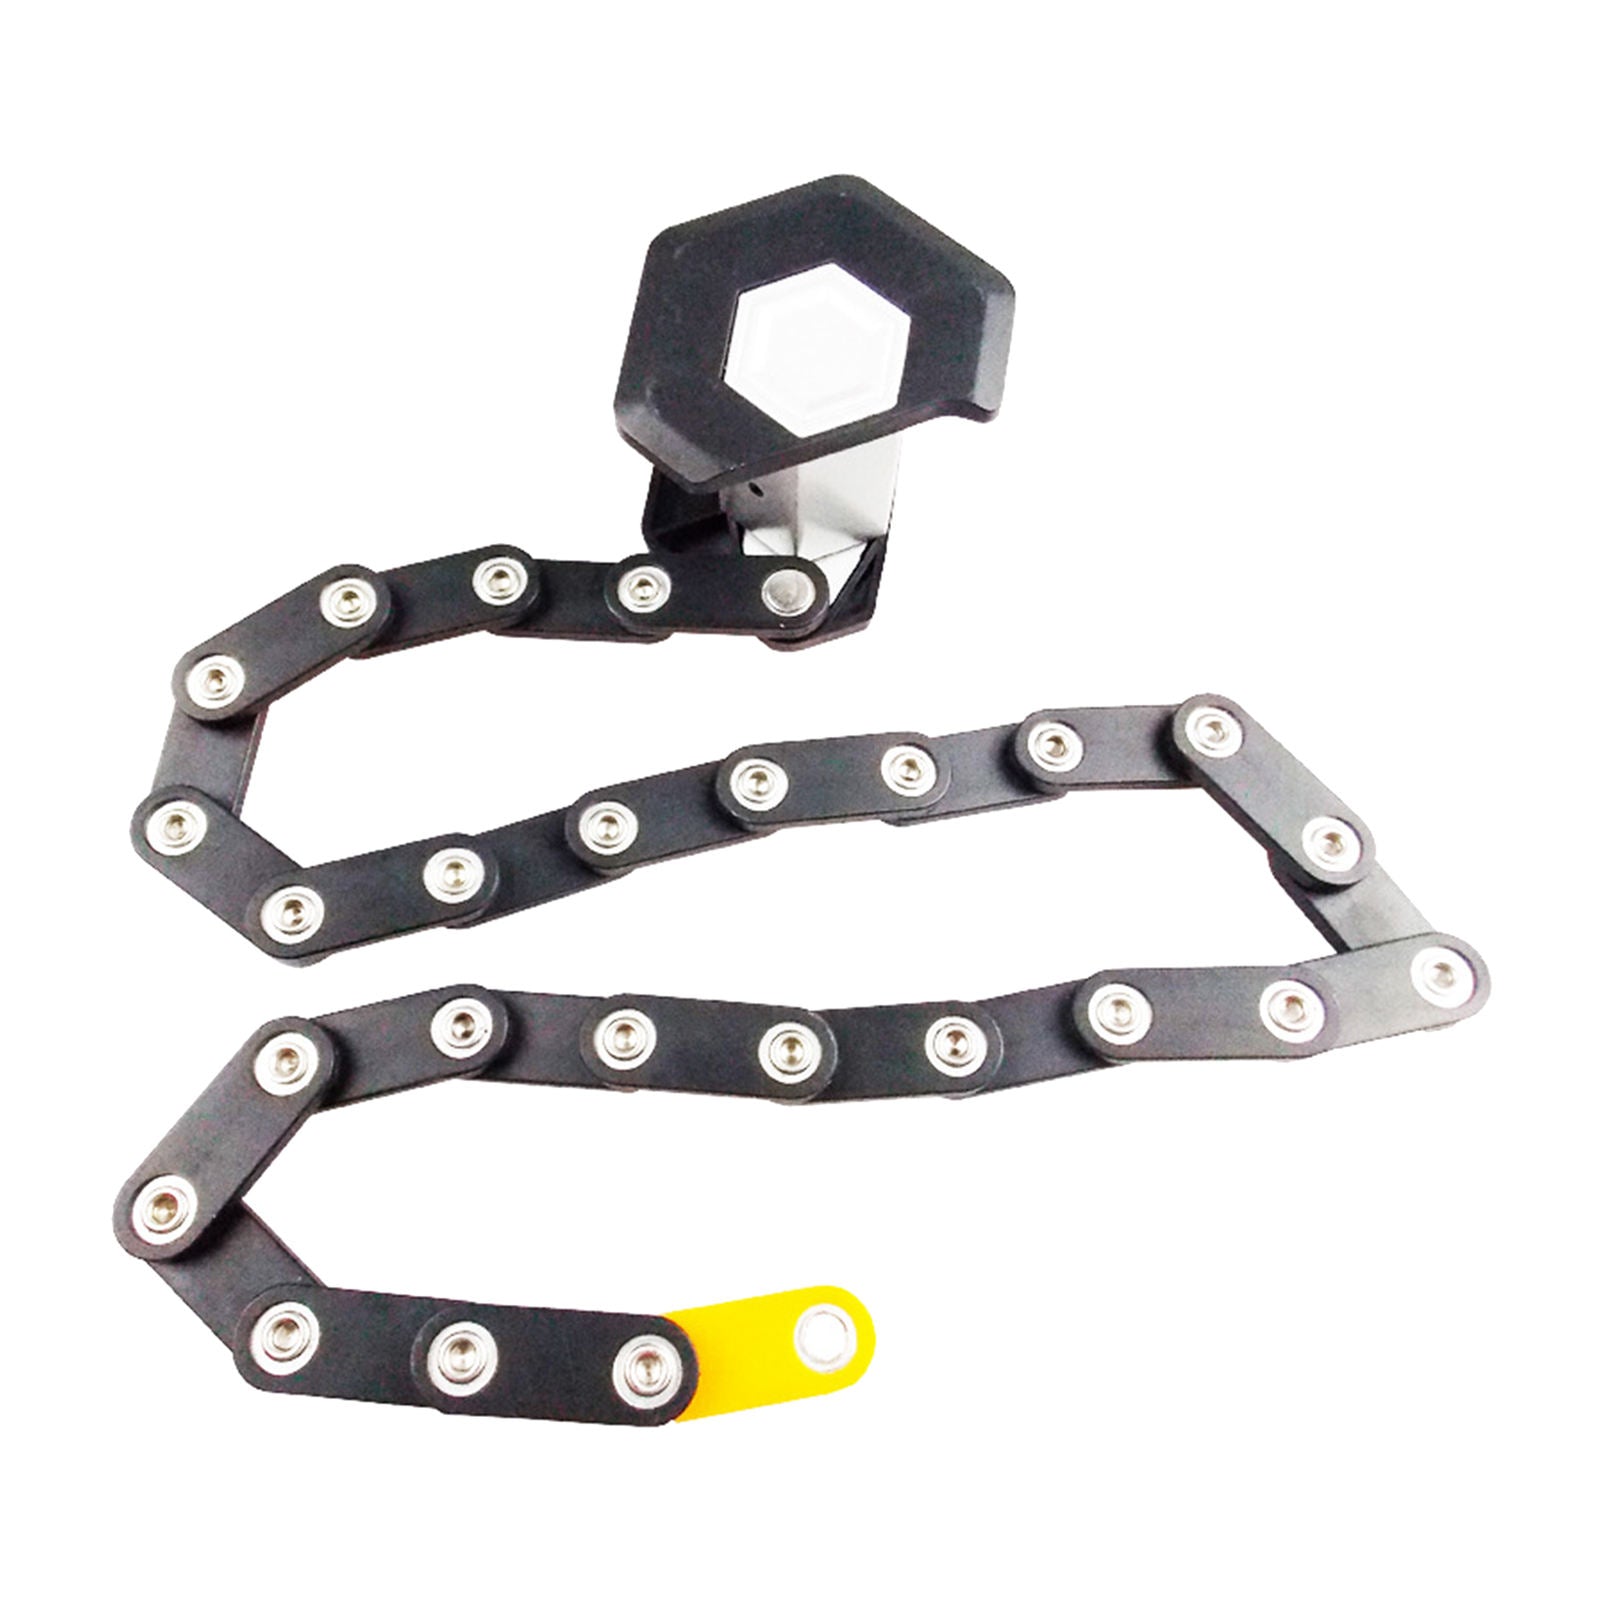 Bicycle Lock Portable Link Folding with Key And Screw for